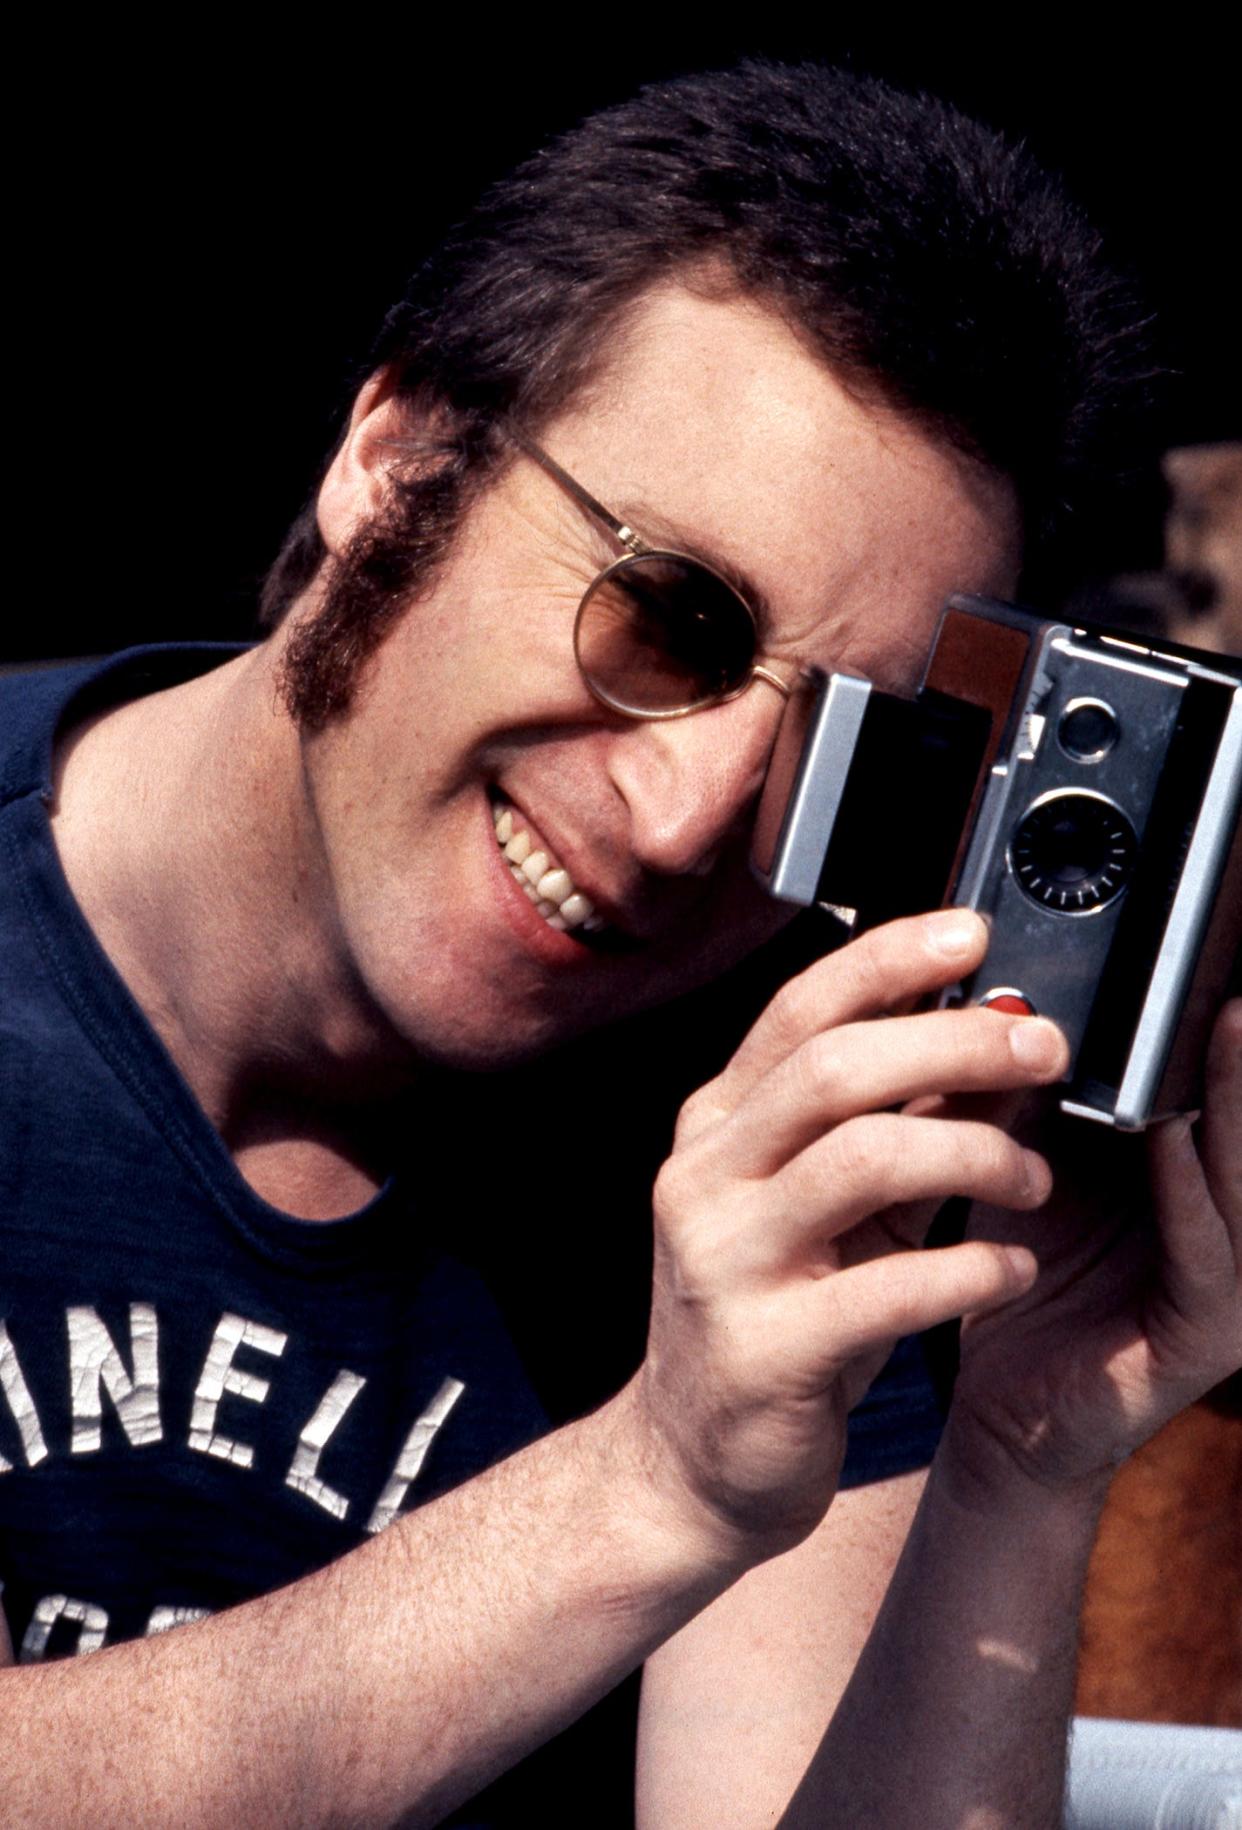 John Lennon manned the camera to document a period of his life he would later call his "lost weekend."